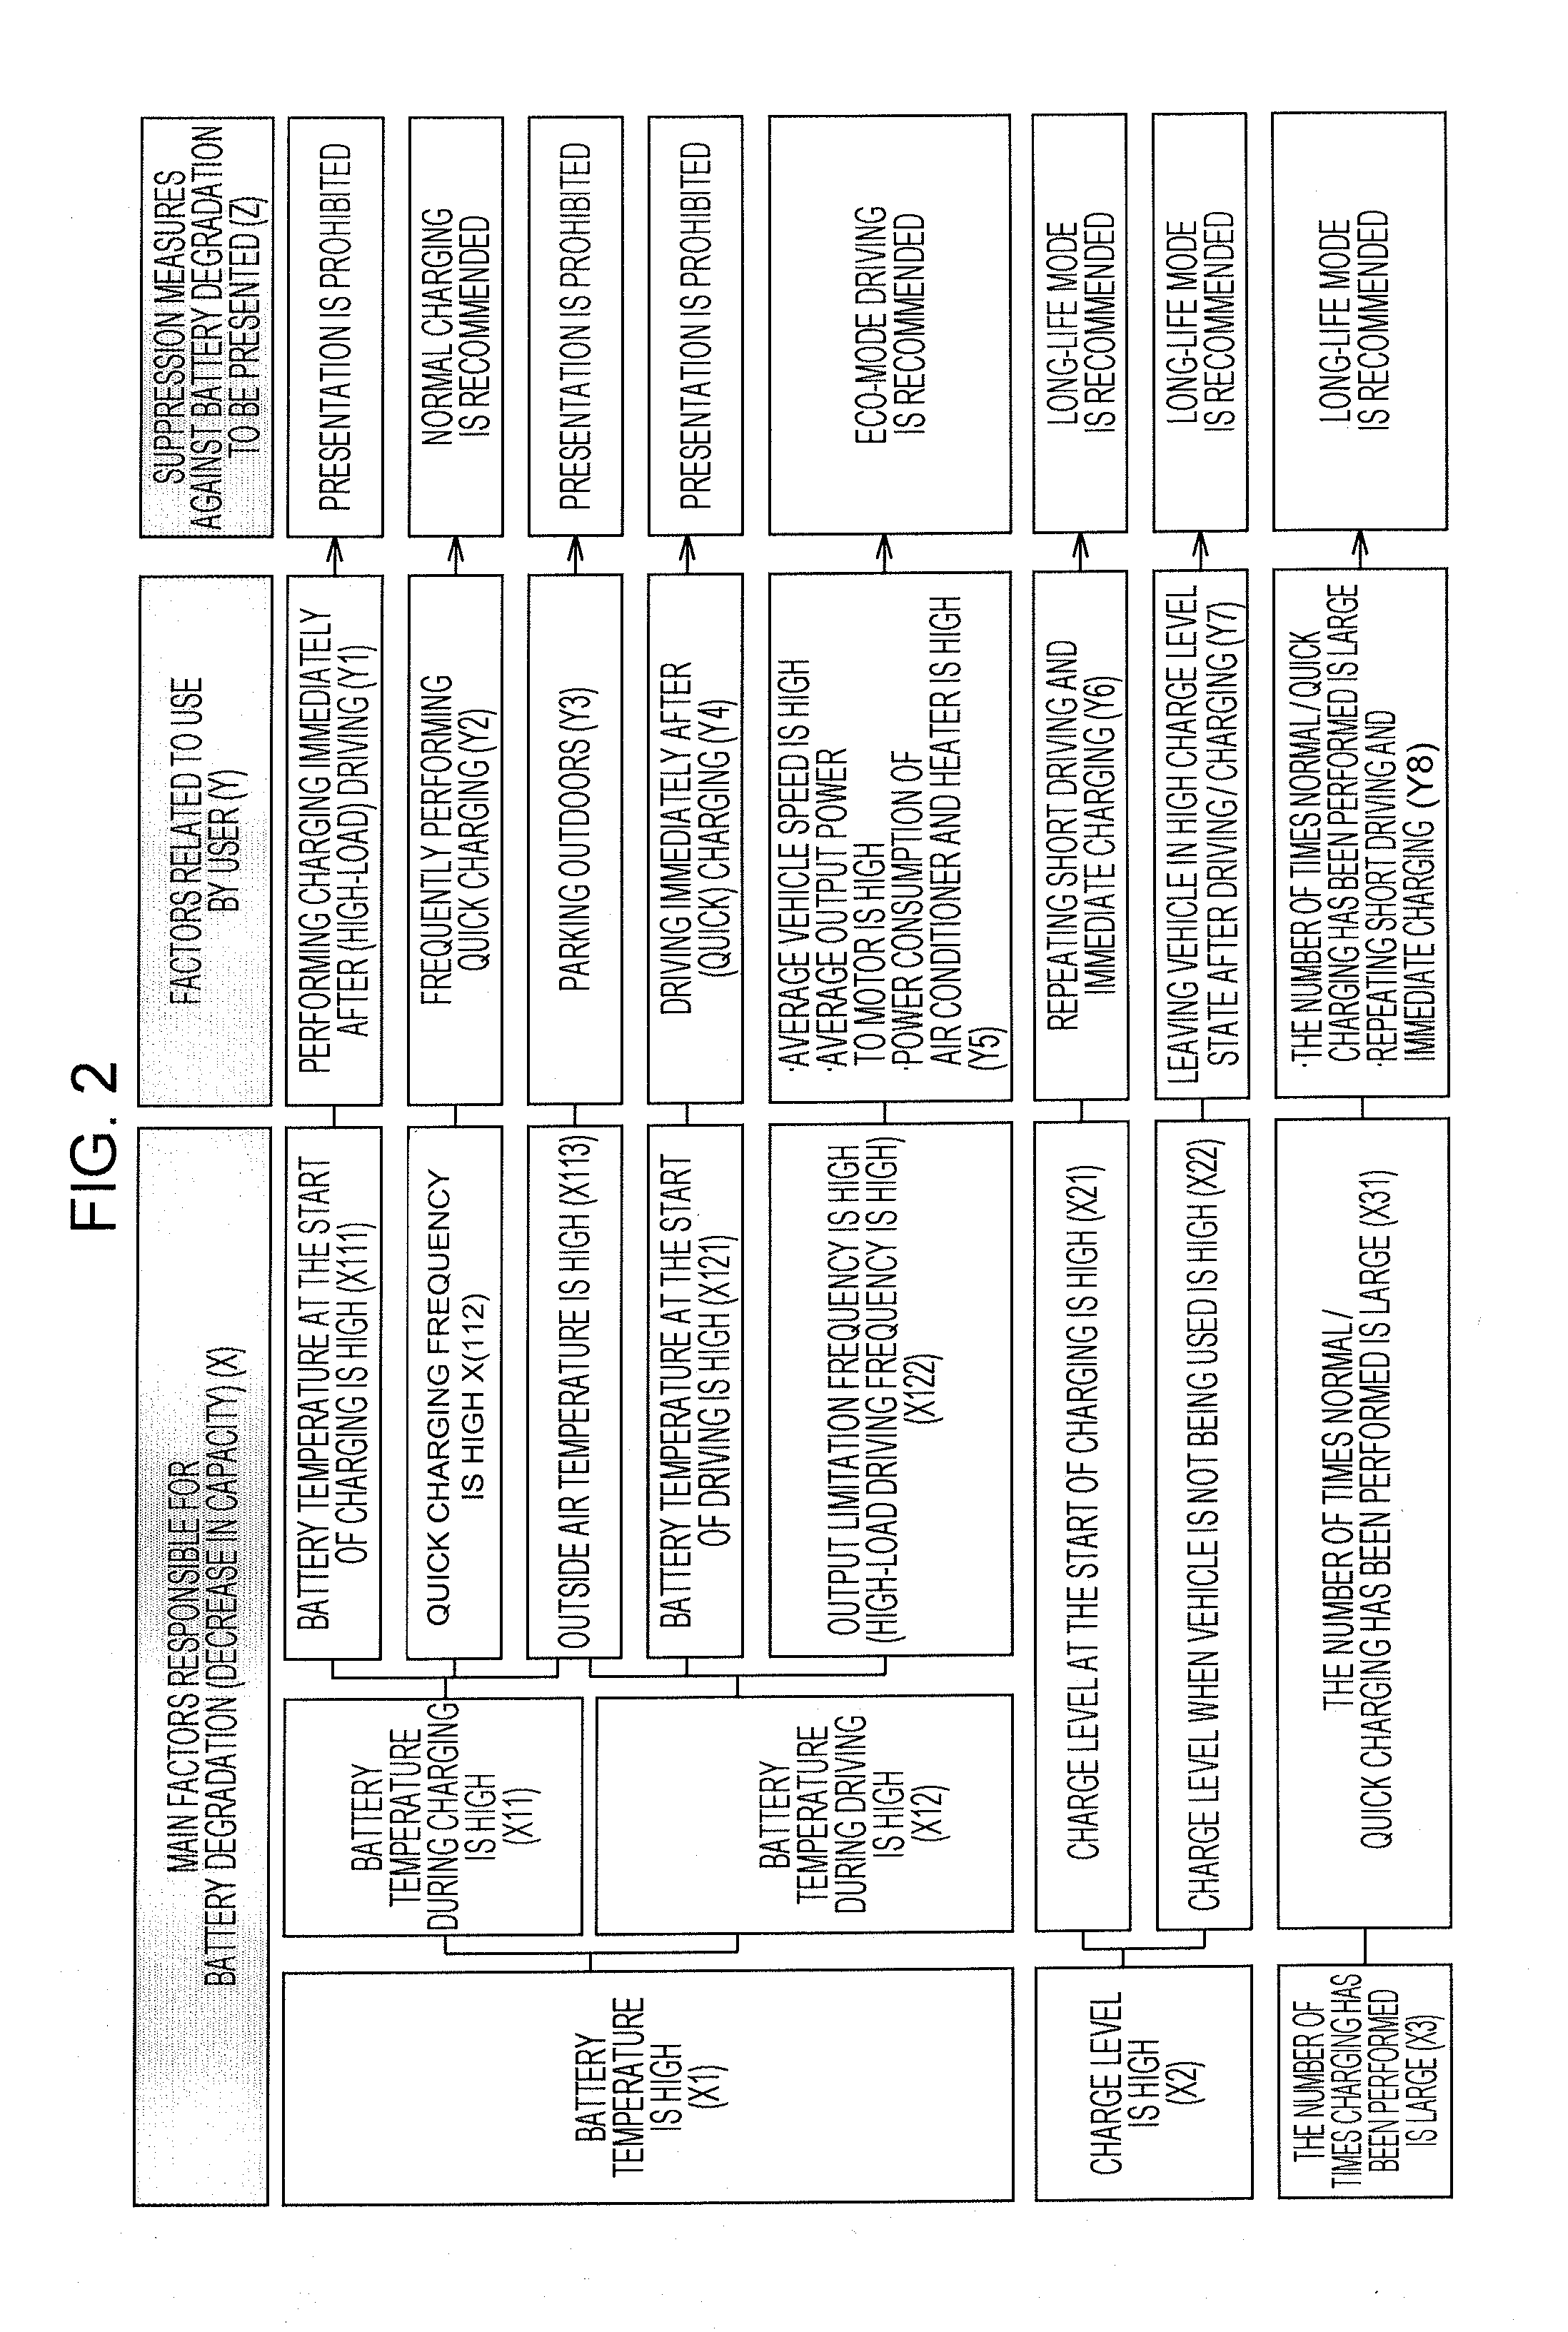 Diagnosis apparatus for vehicle battery